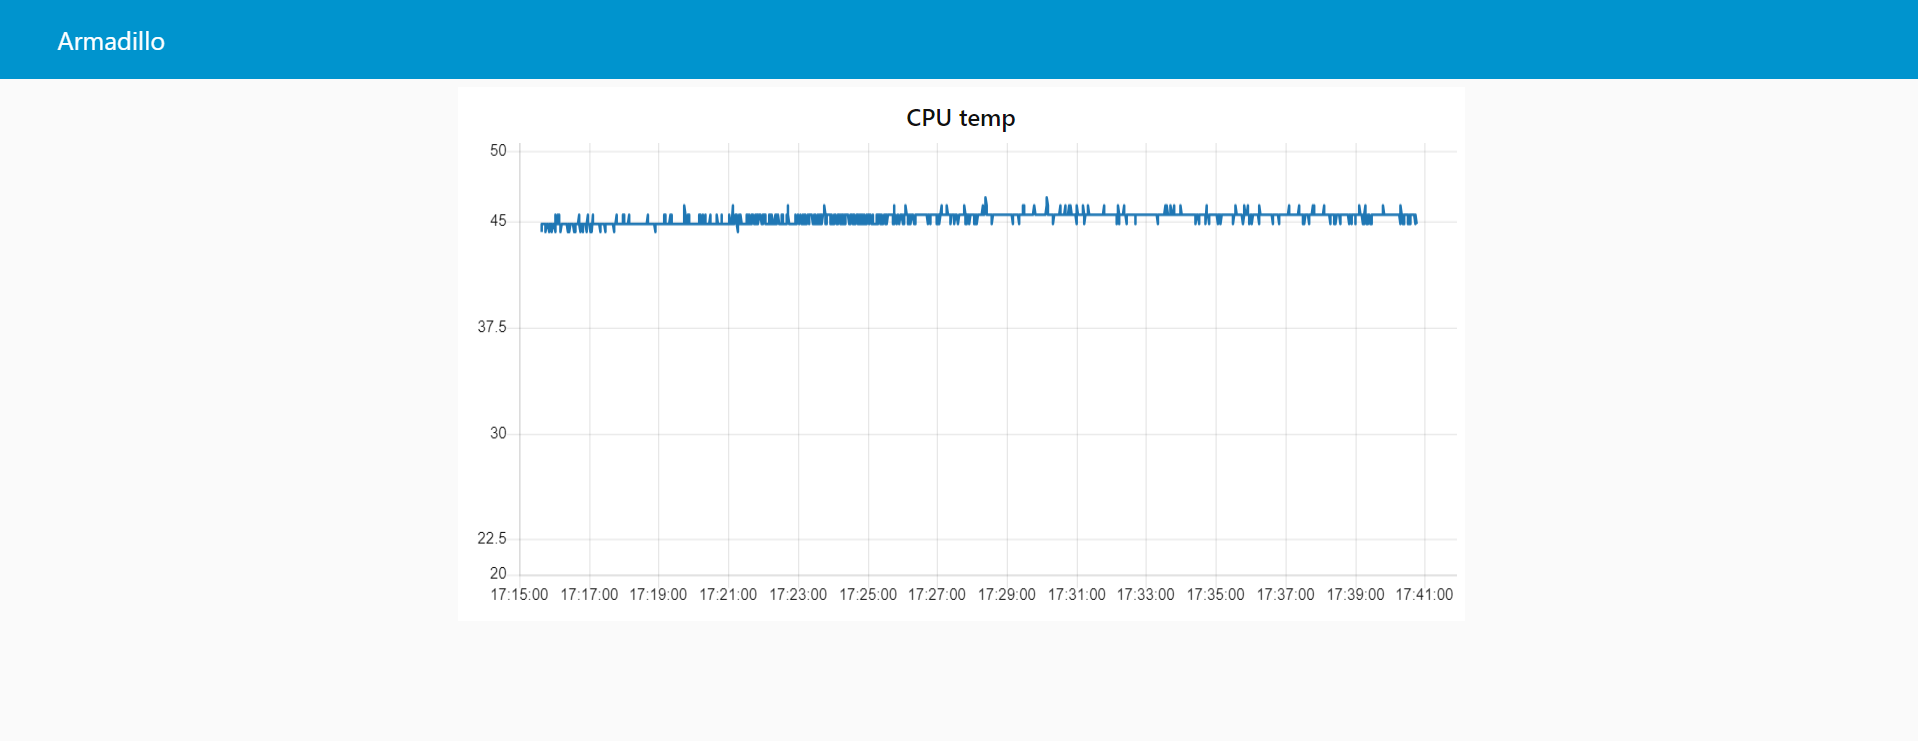 images/node-red/common-images/cpu_temp_dashboard.png